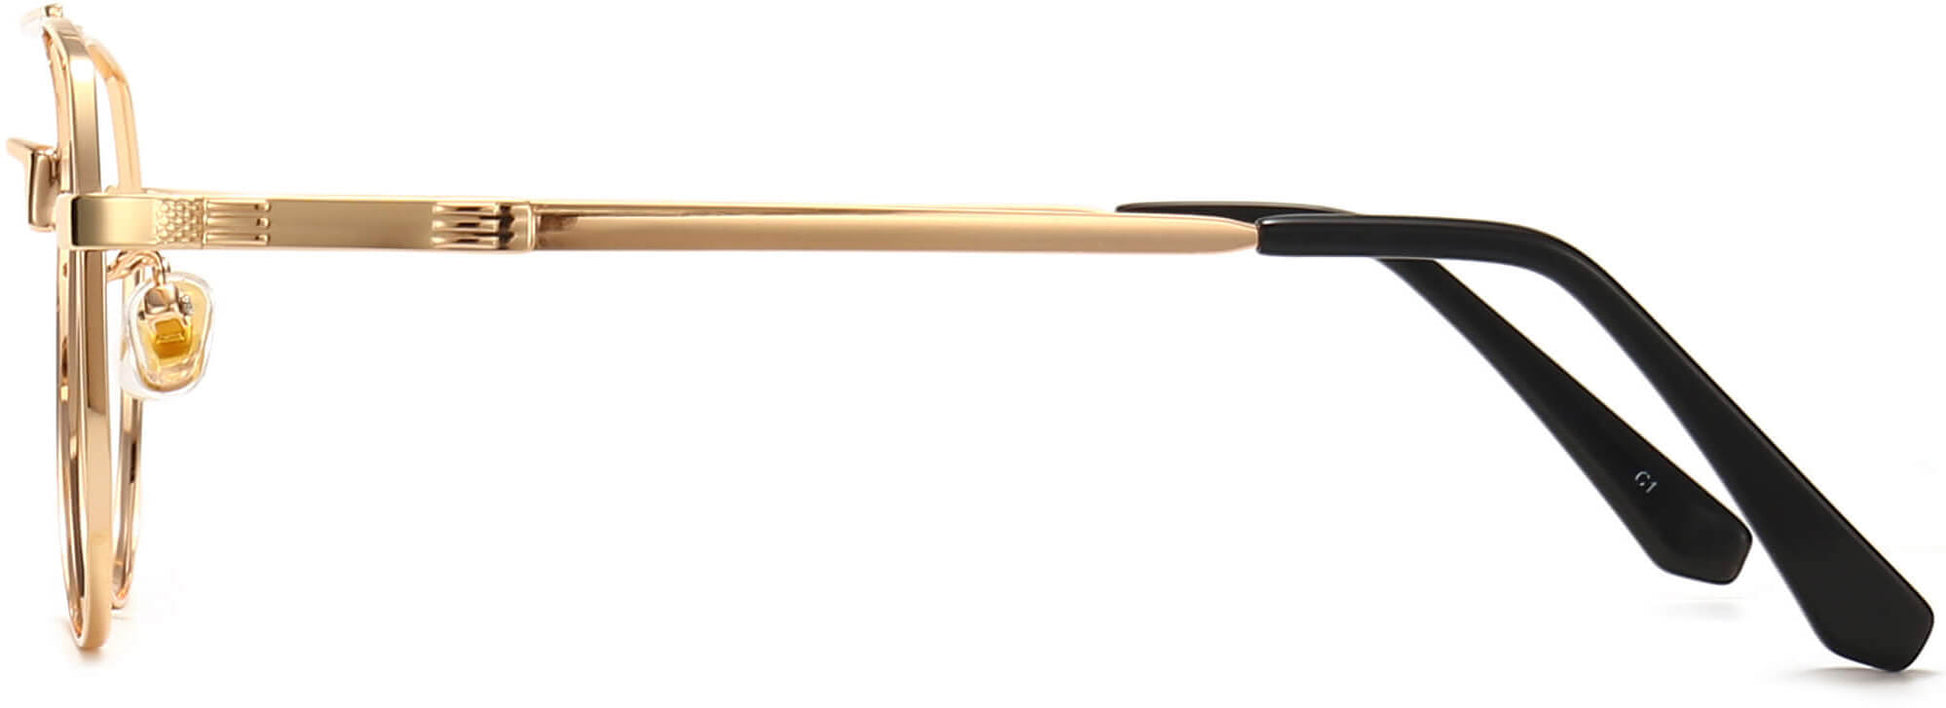 Jorge Aviator Gold Eyeglasses from ANRRI, side view